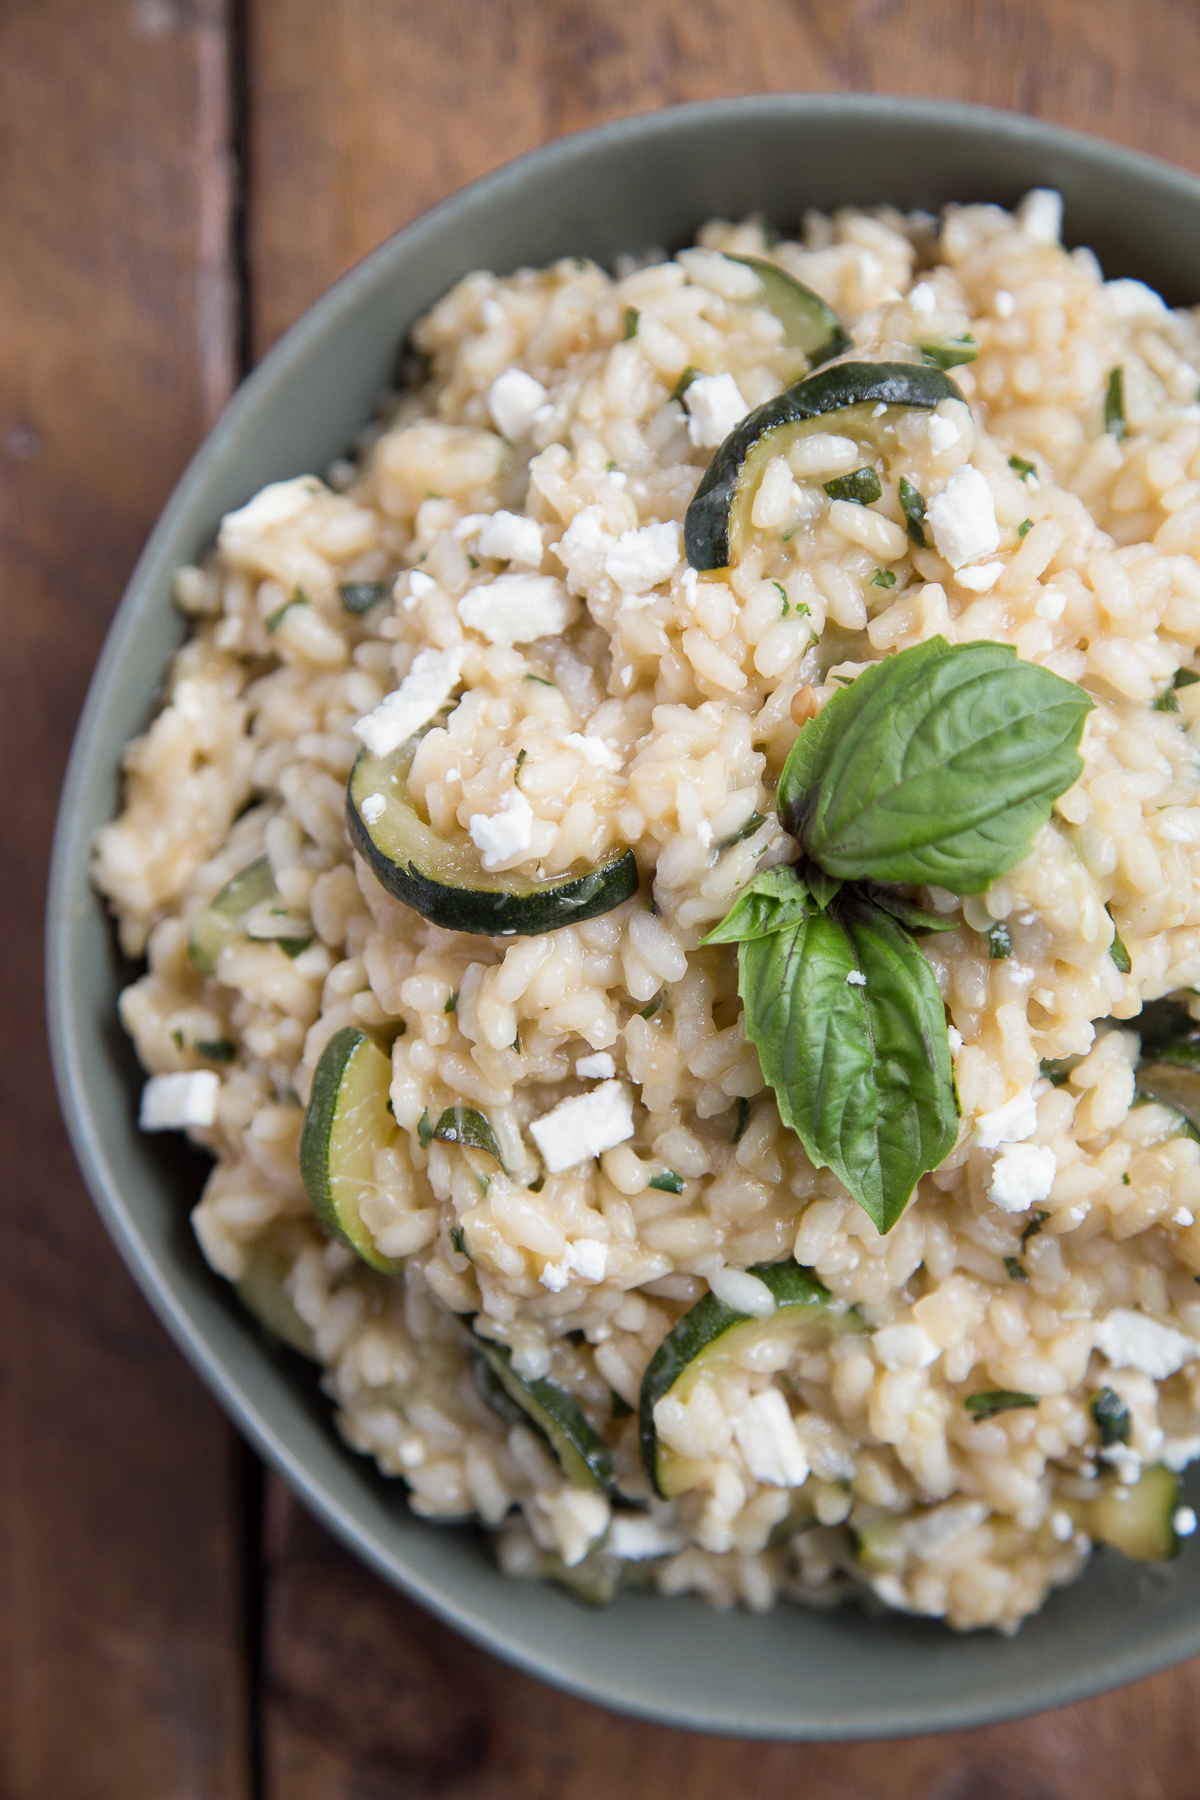 zucchini risotto with feta and fresh herbs in a green bowl on a wooden table